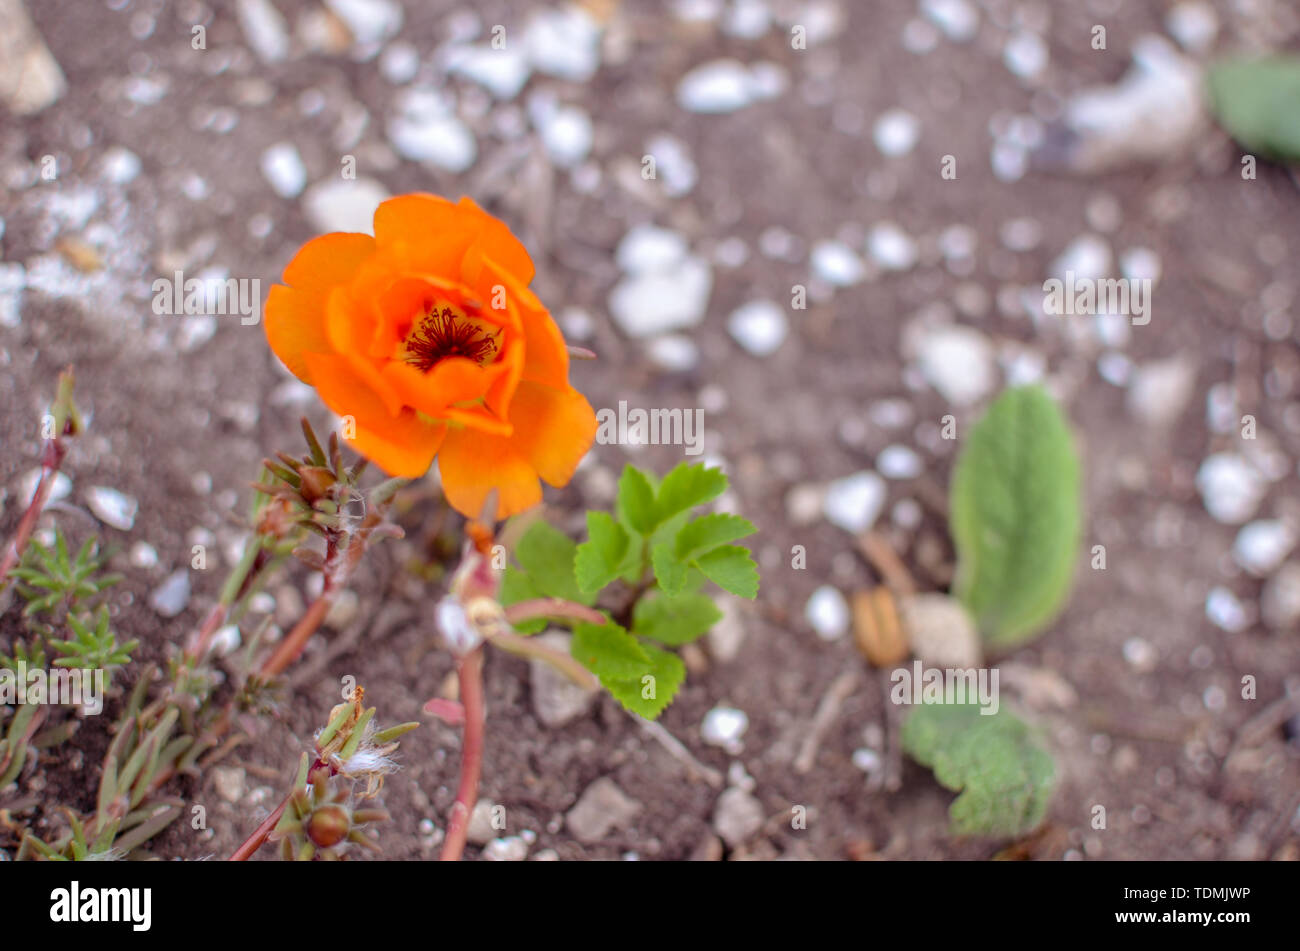 Colorful Purslane flowers in the garden. Moss rose, Portulaca, or Purslane background. Stock Photo